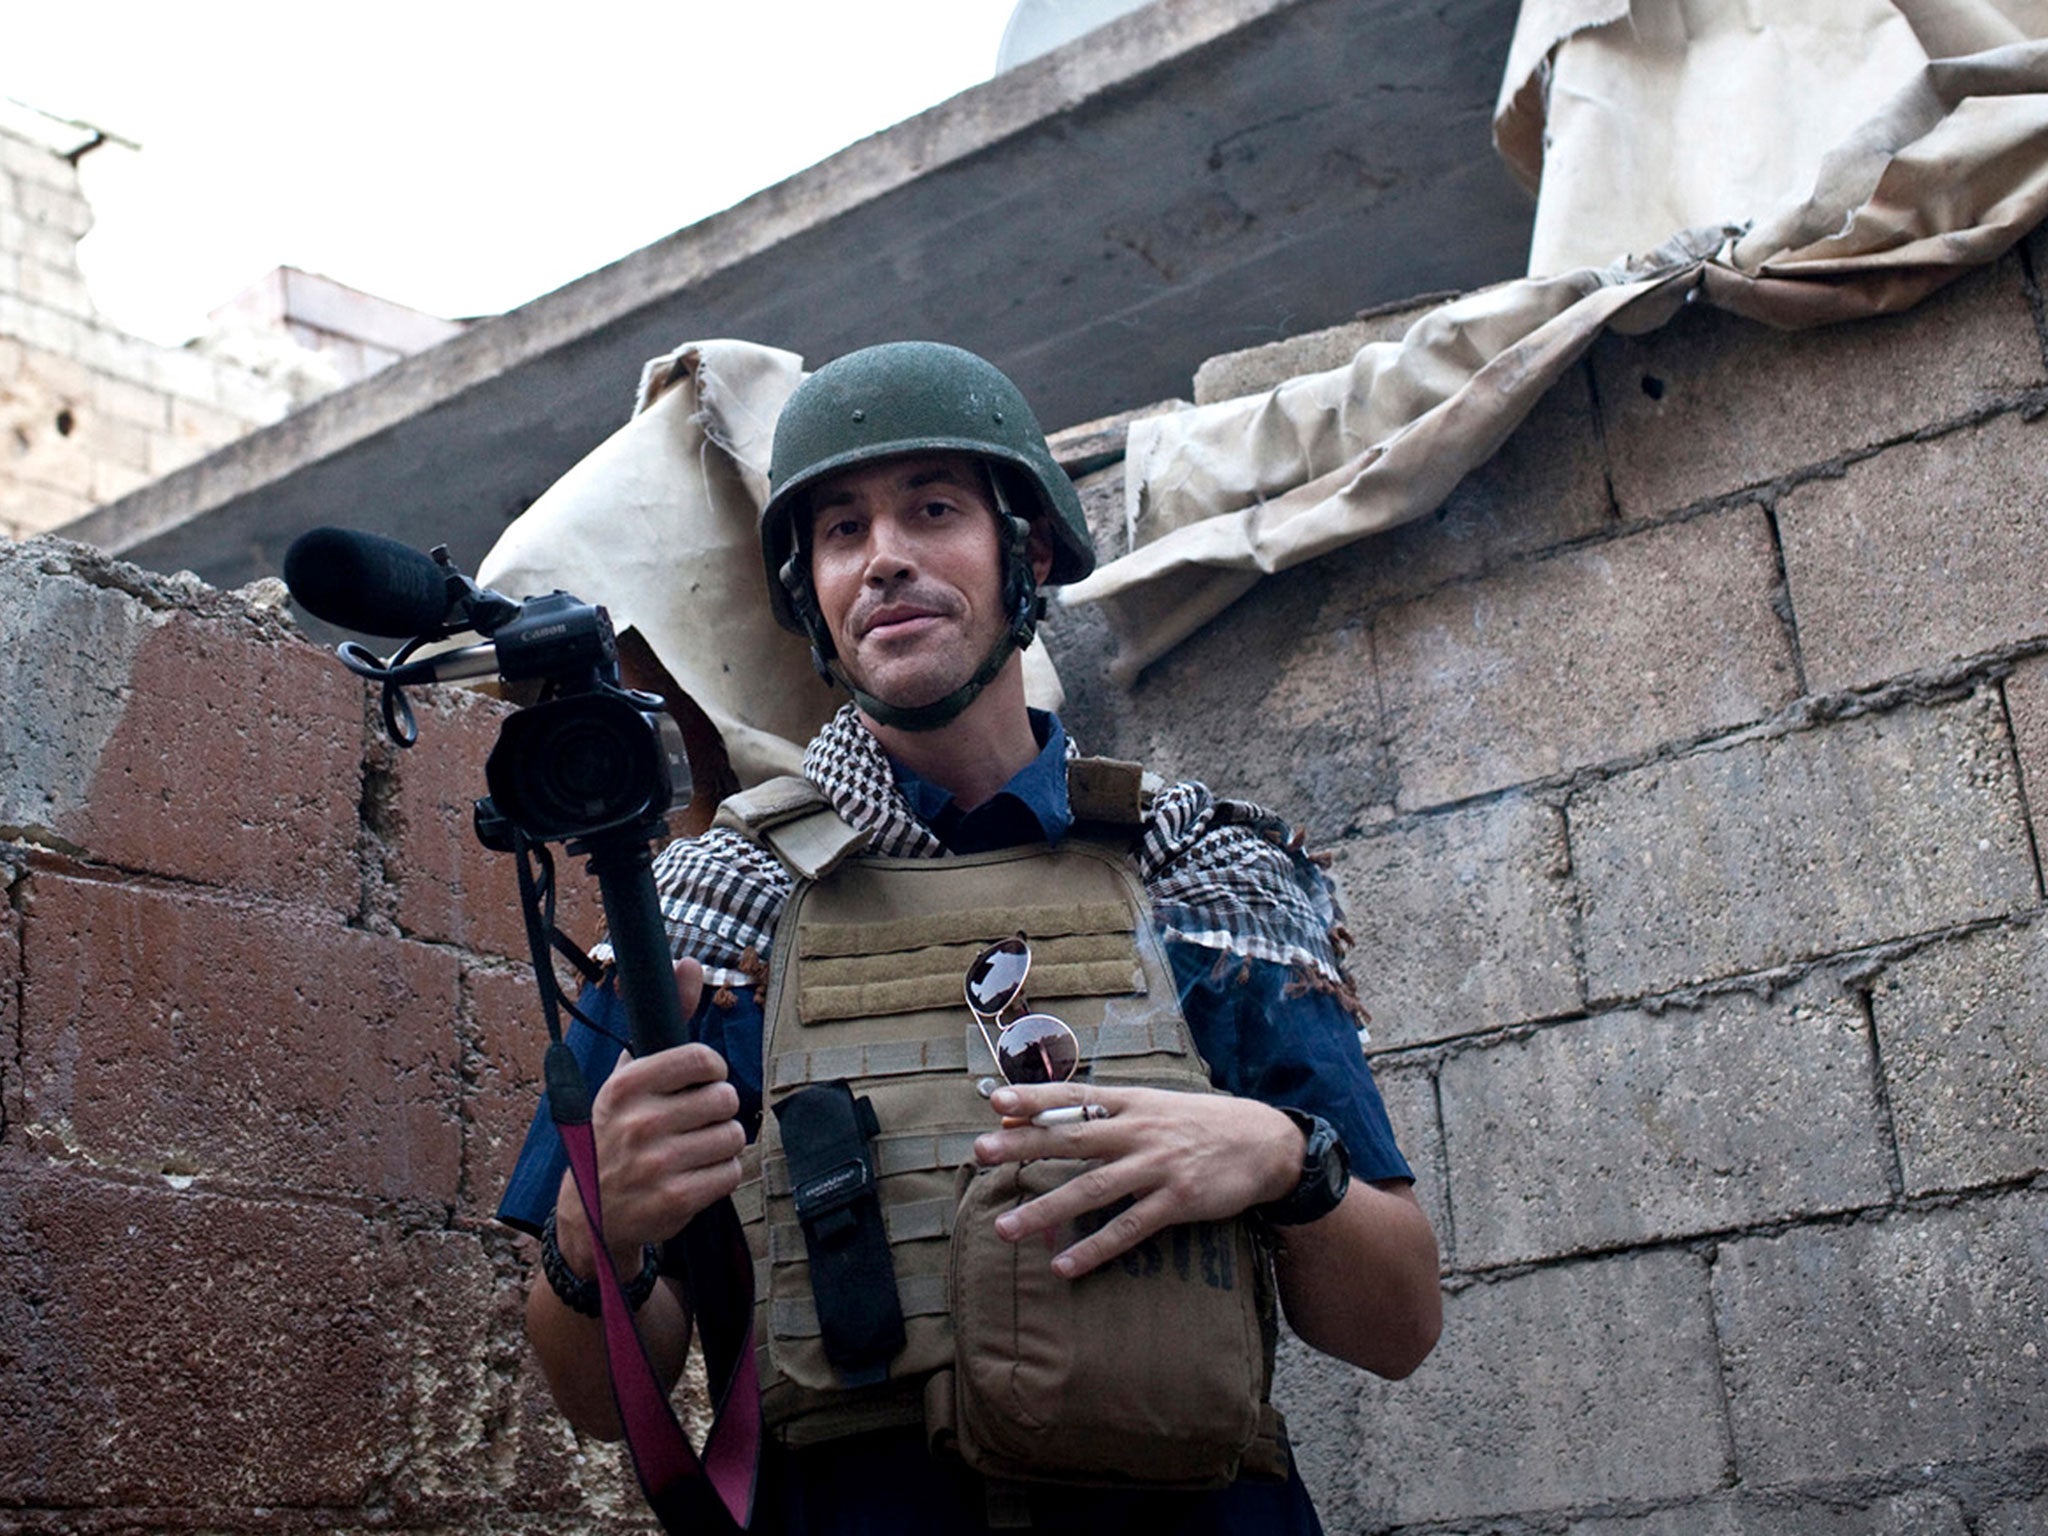 American journalist James Foley was among the hostages killed in Isis propaganda videos